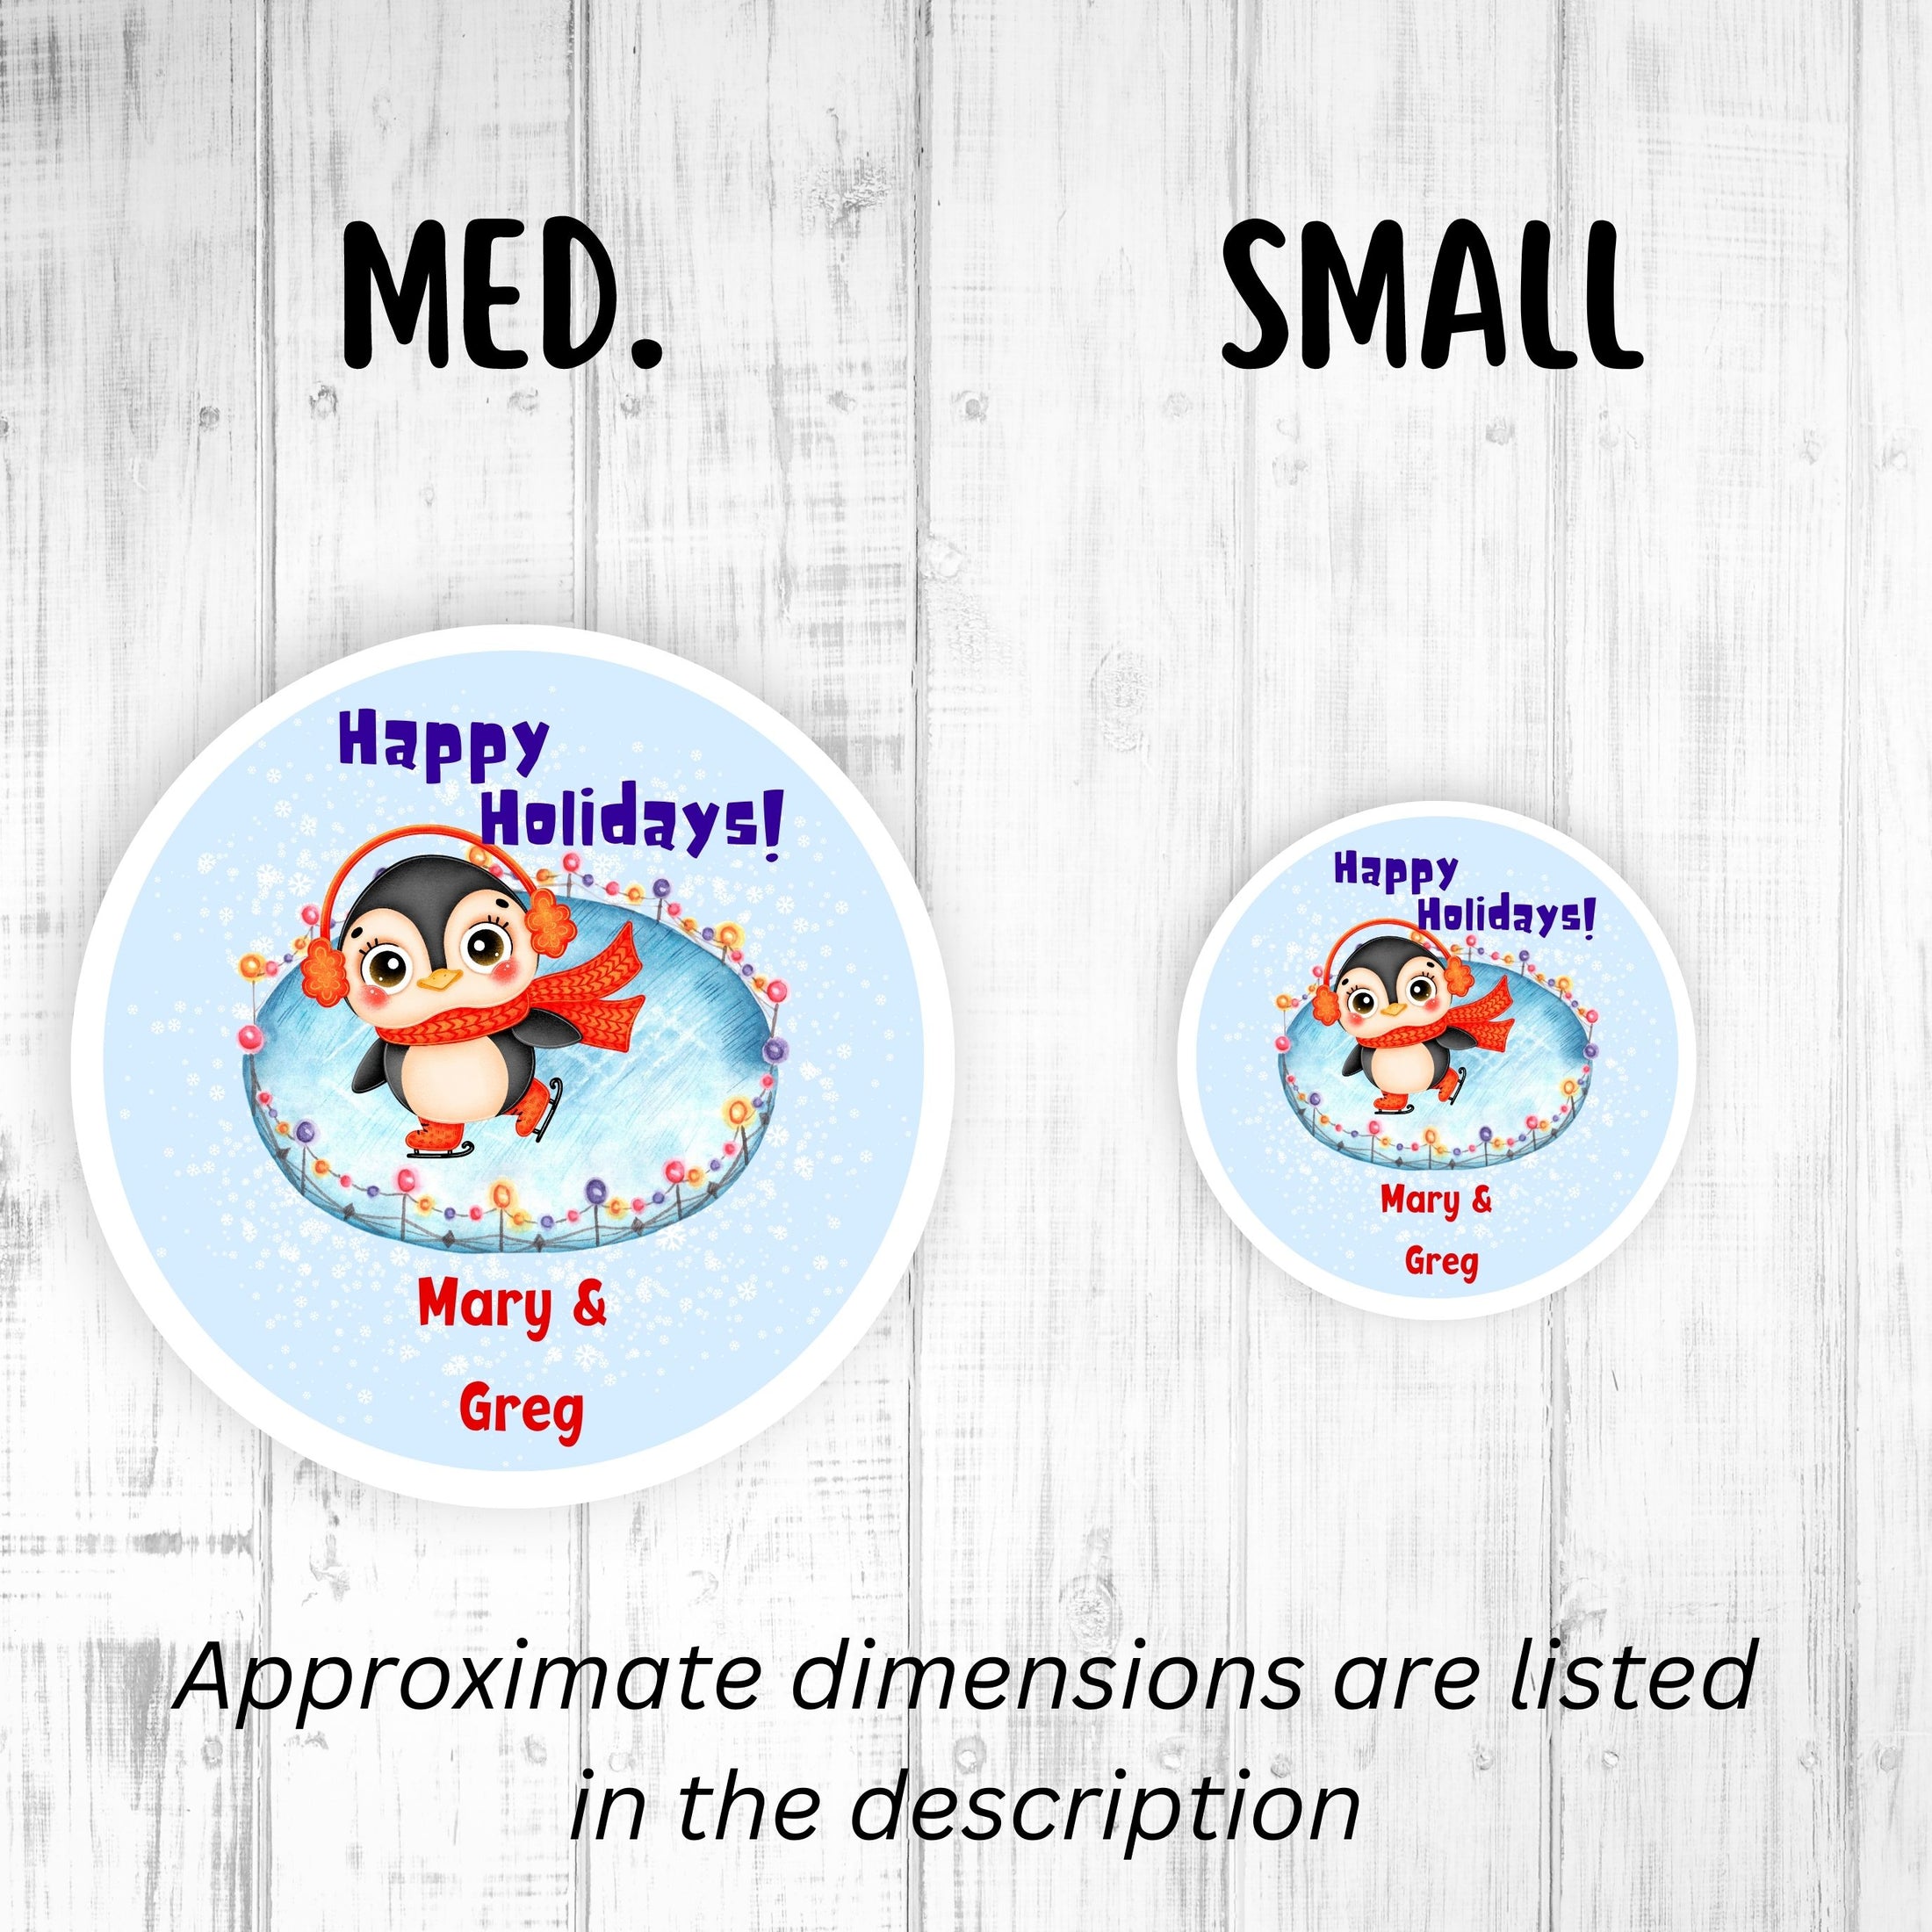 This image shows the medium and small holiday stickers side-by-side for a size comparison, and it says “Approximate dimensions are listed in the description.